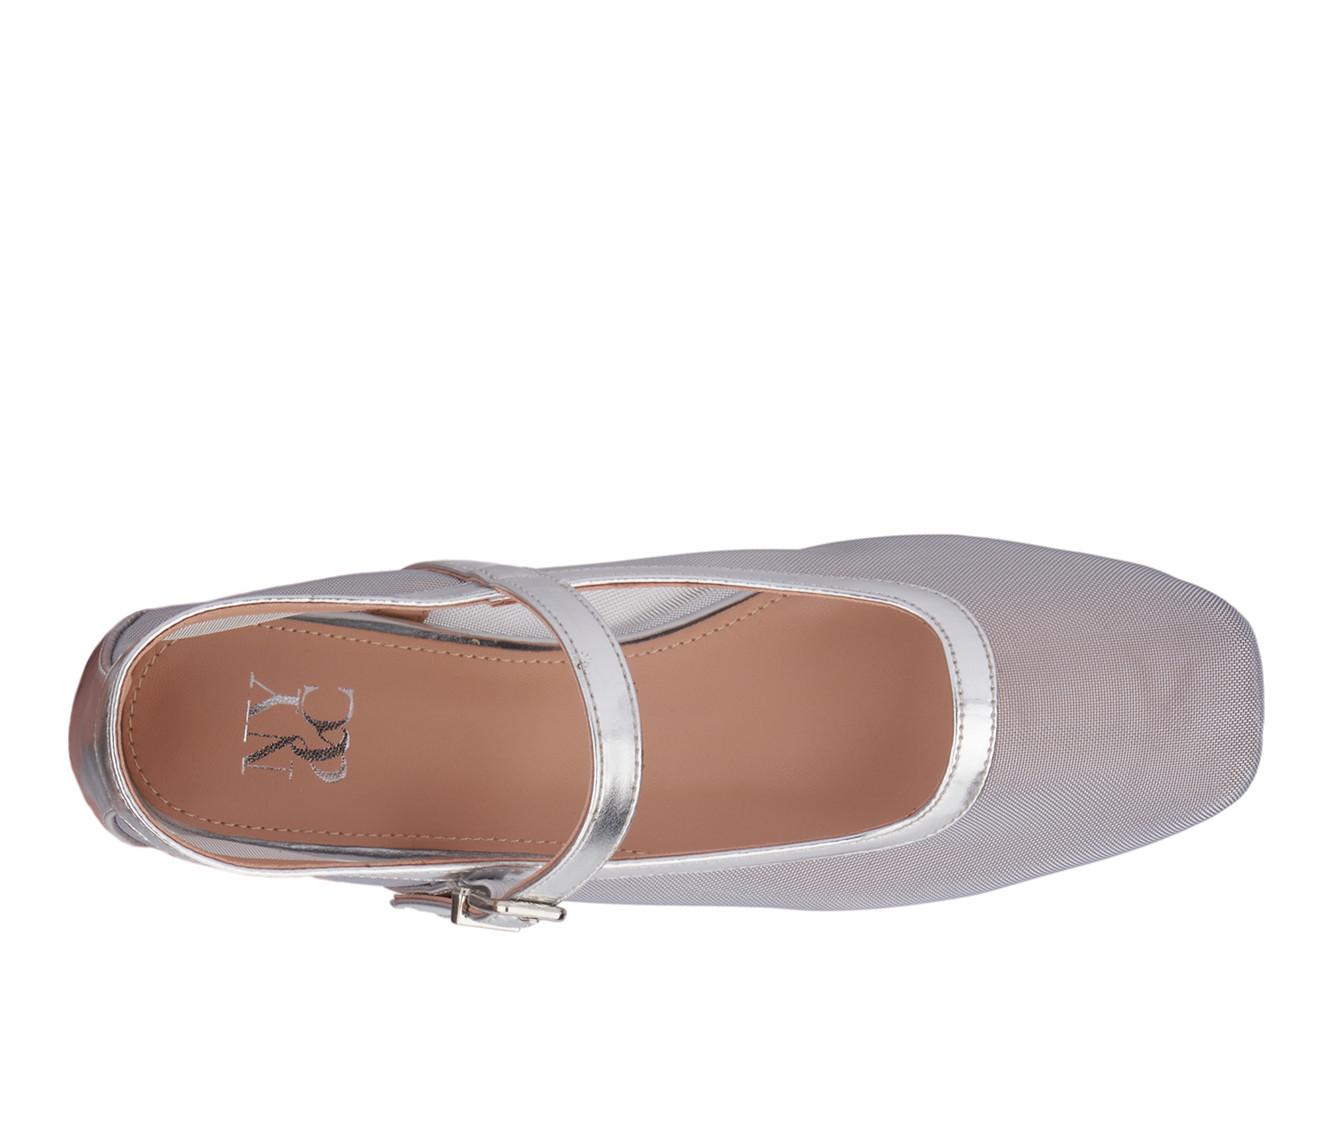 Women's New York and Company Page 2 Mary Jane Flats